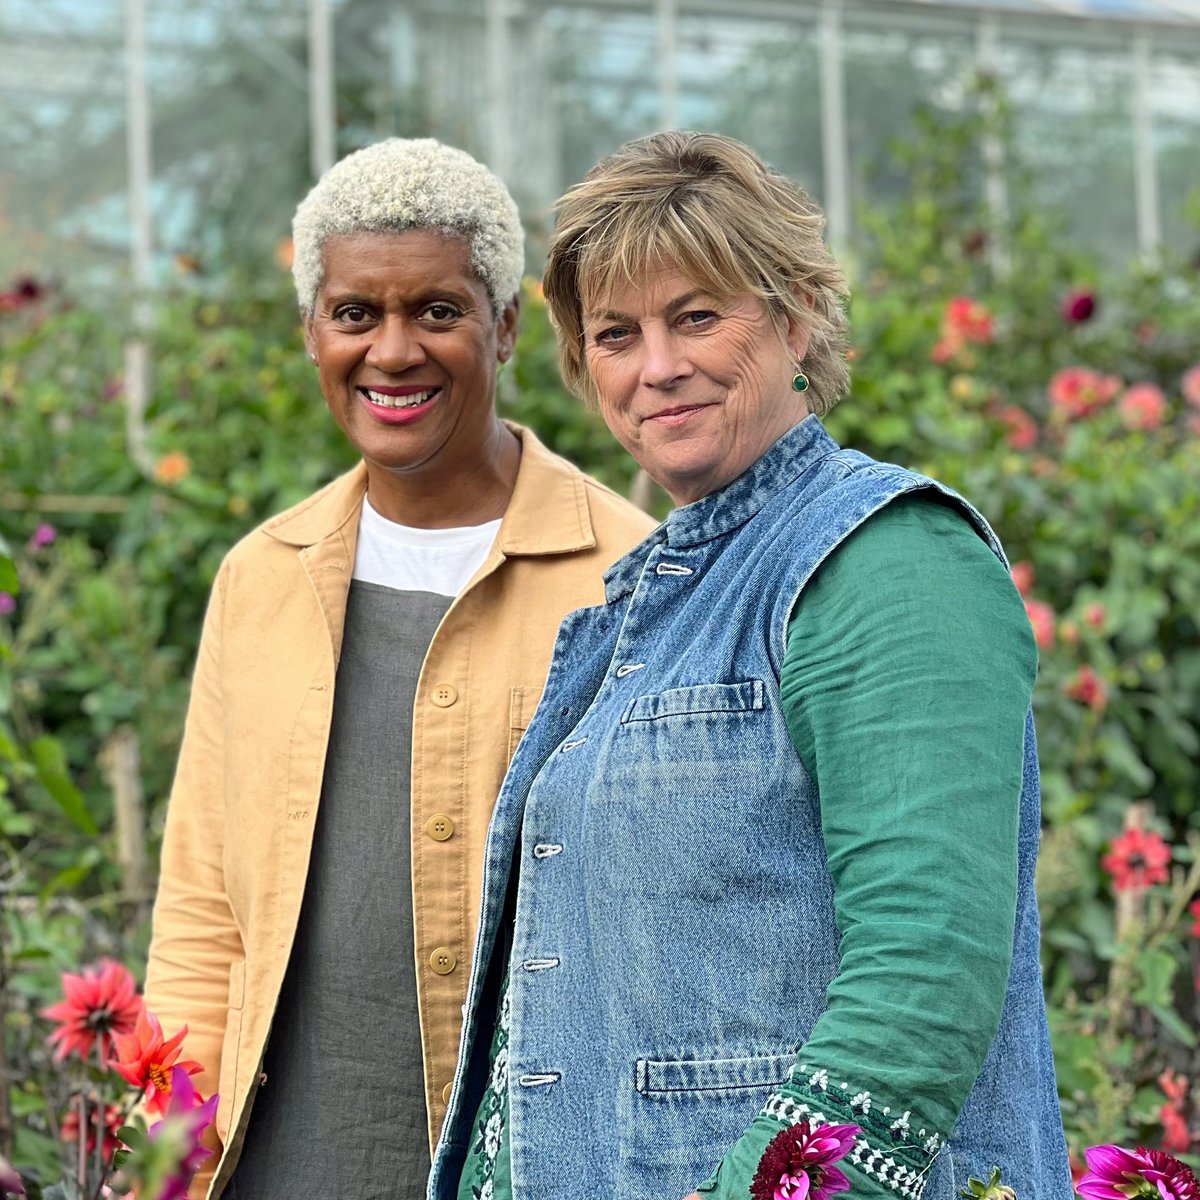 If you love dahlias as much as Sarah Raven, then Arit's visit to Perch Hill Farm is a must-watch this week! Tune in on Friday at 9pm on BBC Two to find out more 😎 ✂️ #DahliaLove #GardenersWorld #CutFlowers #FlowersOnFriday